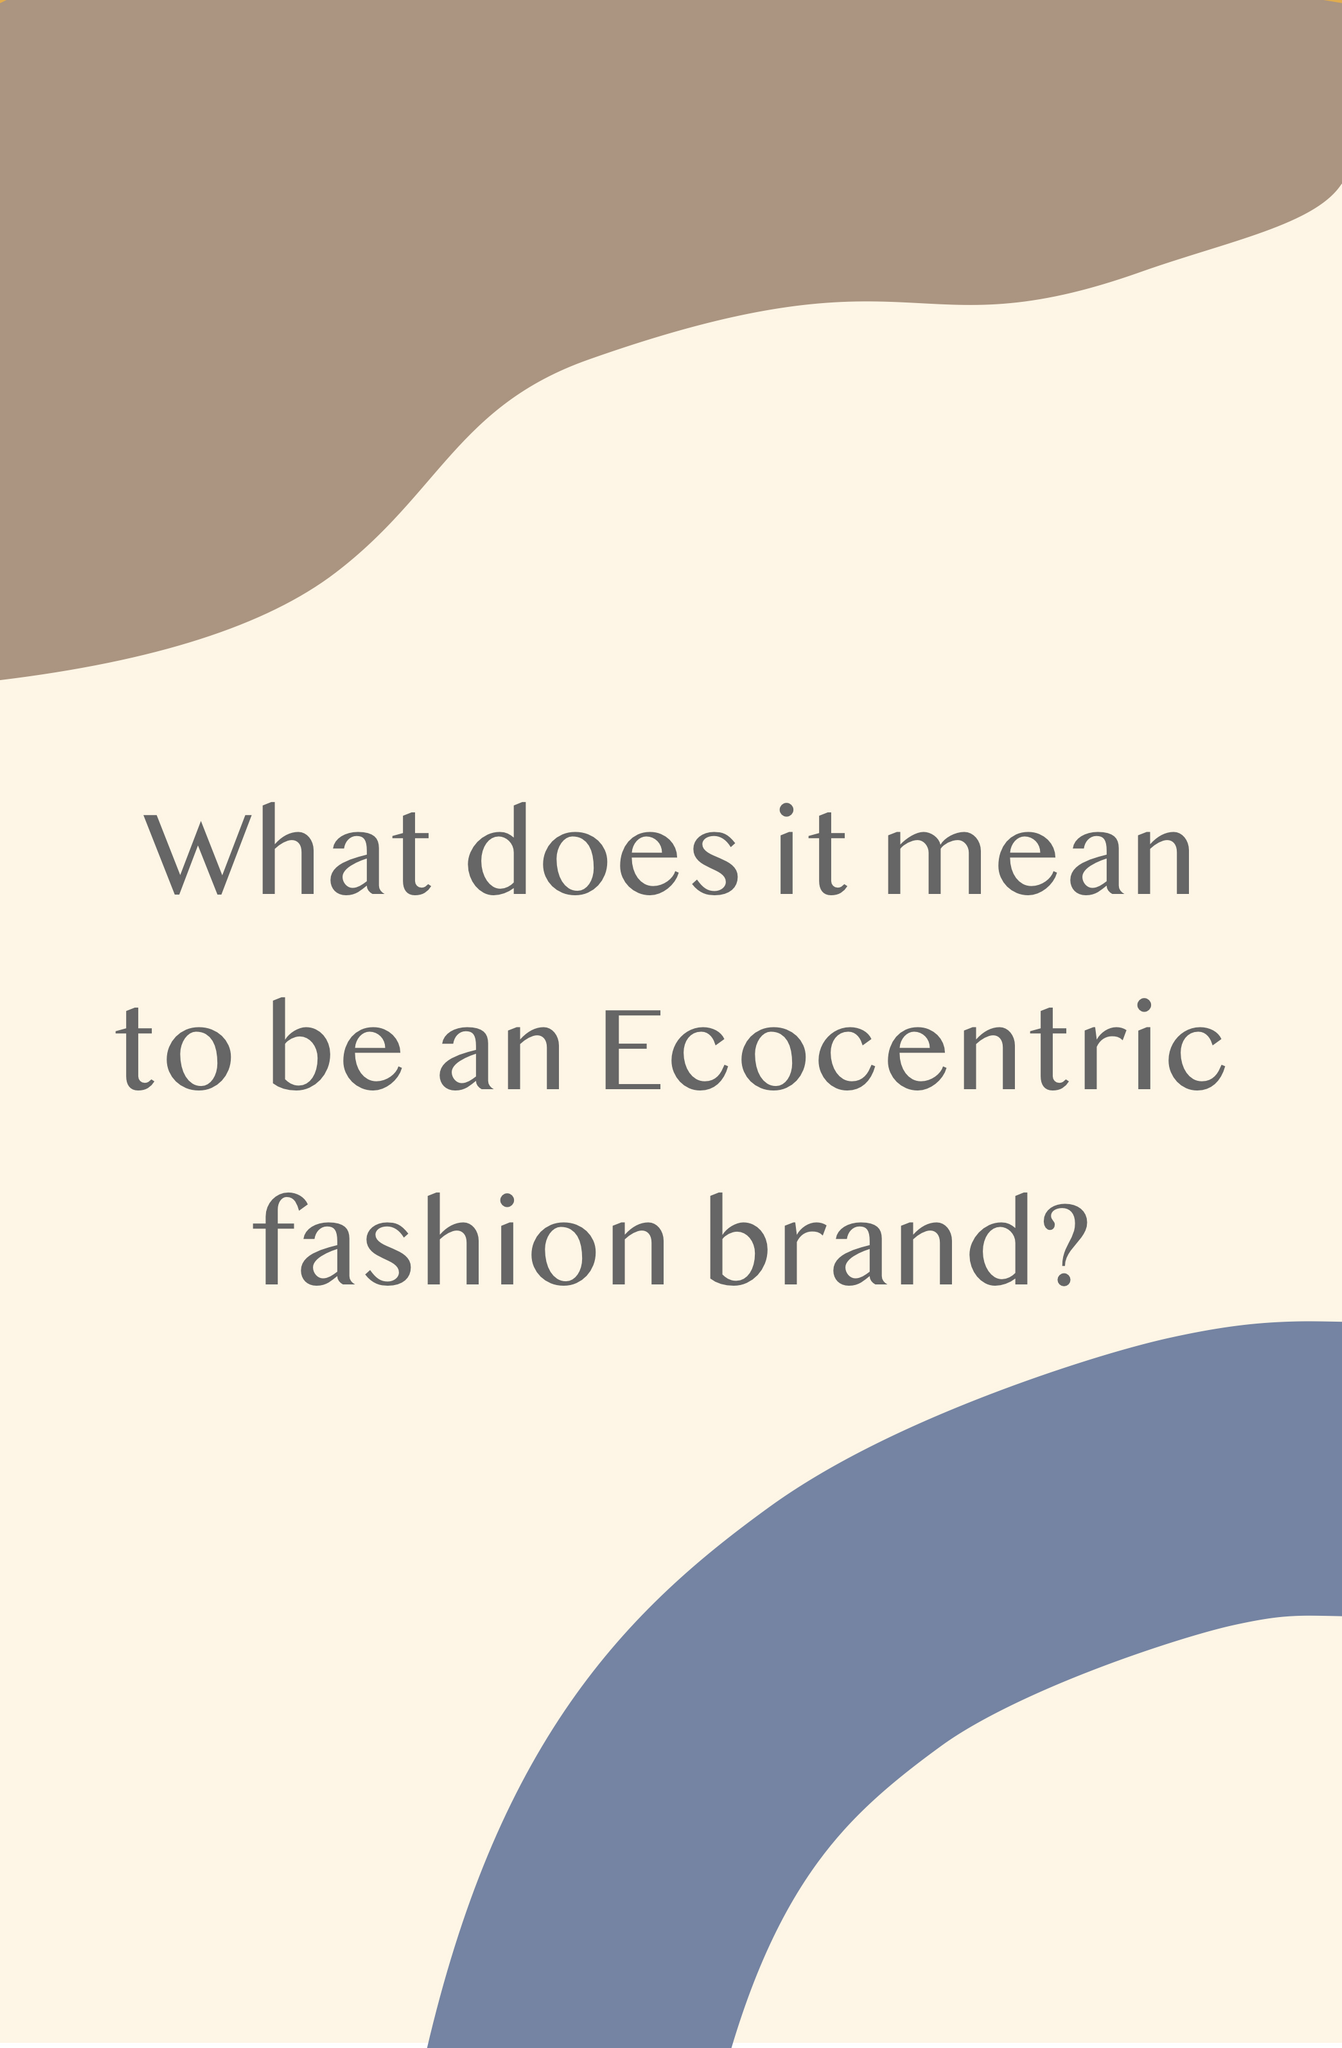 What does Ecocentric mean?